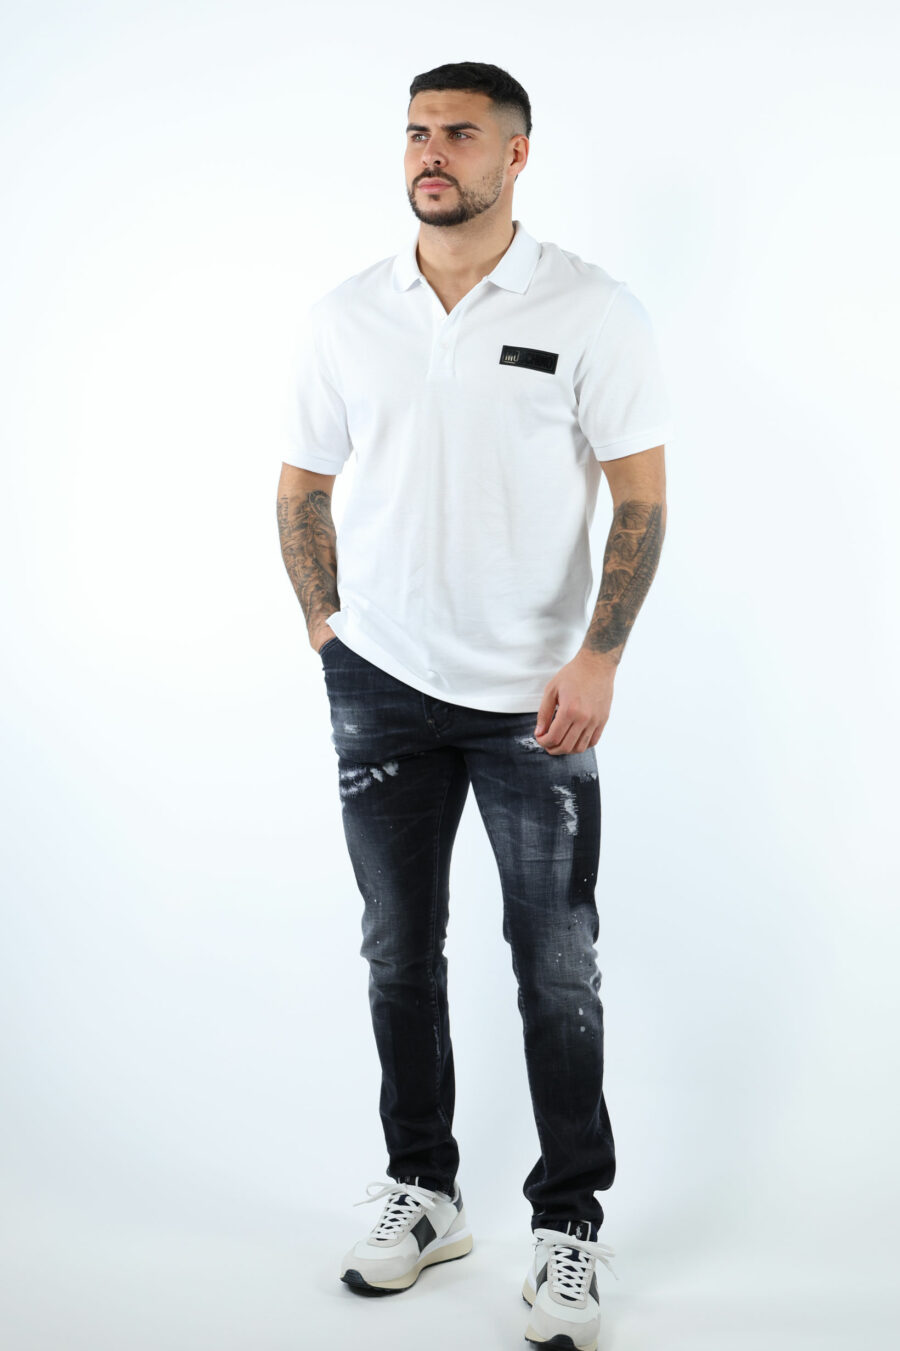 Black "cool guy jean" jeans with rips and frayed - 106753